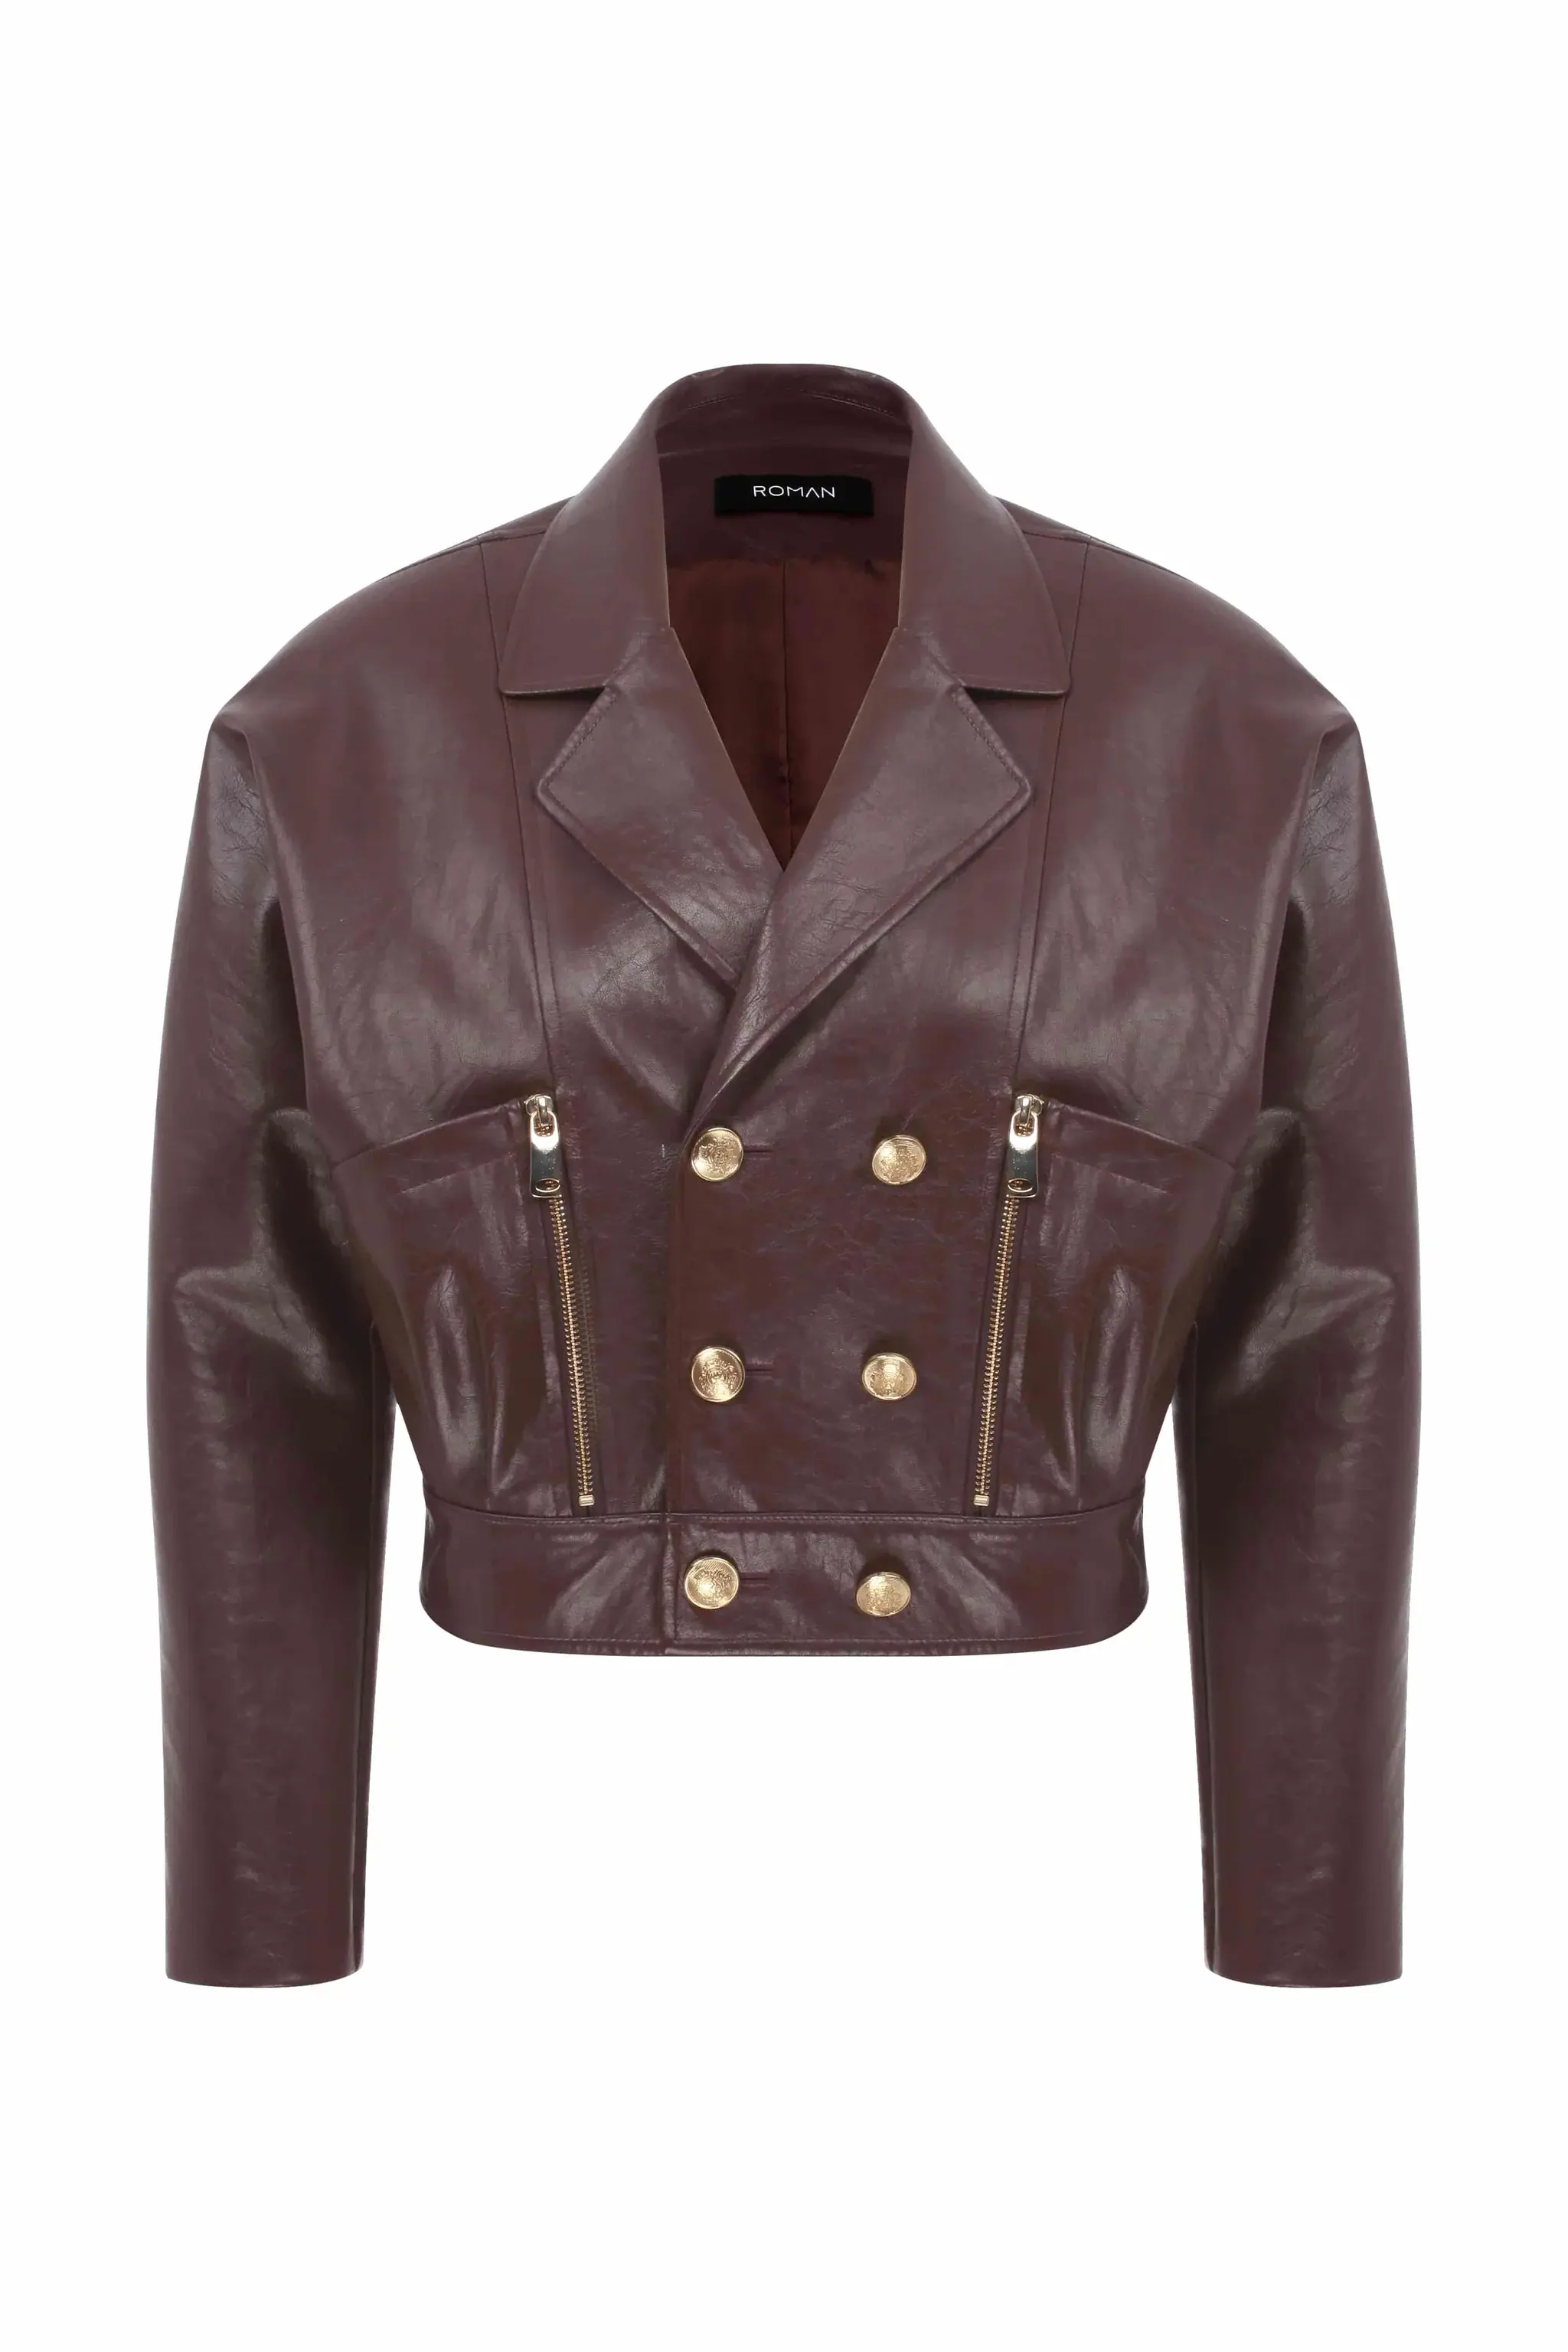 Roman Brown Leather Jacket With Gold Button - 4 / Brown. 1